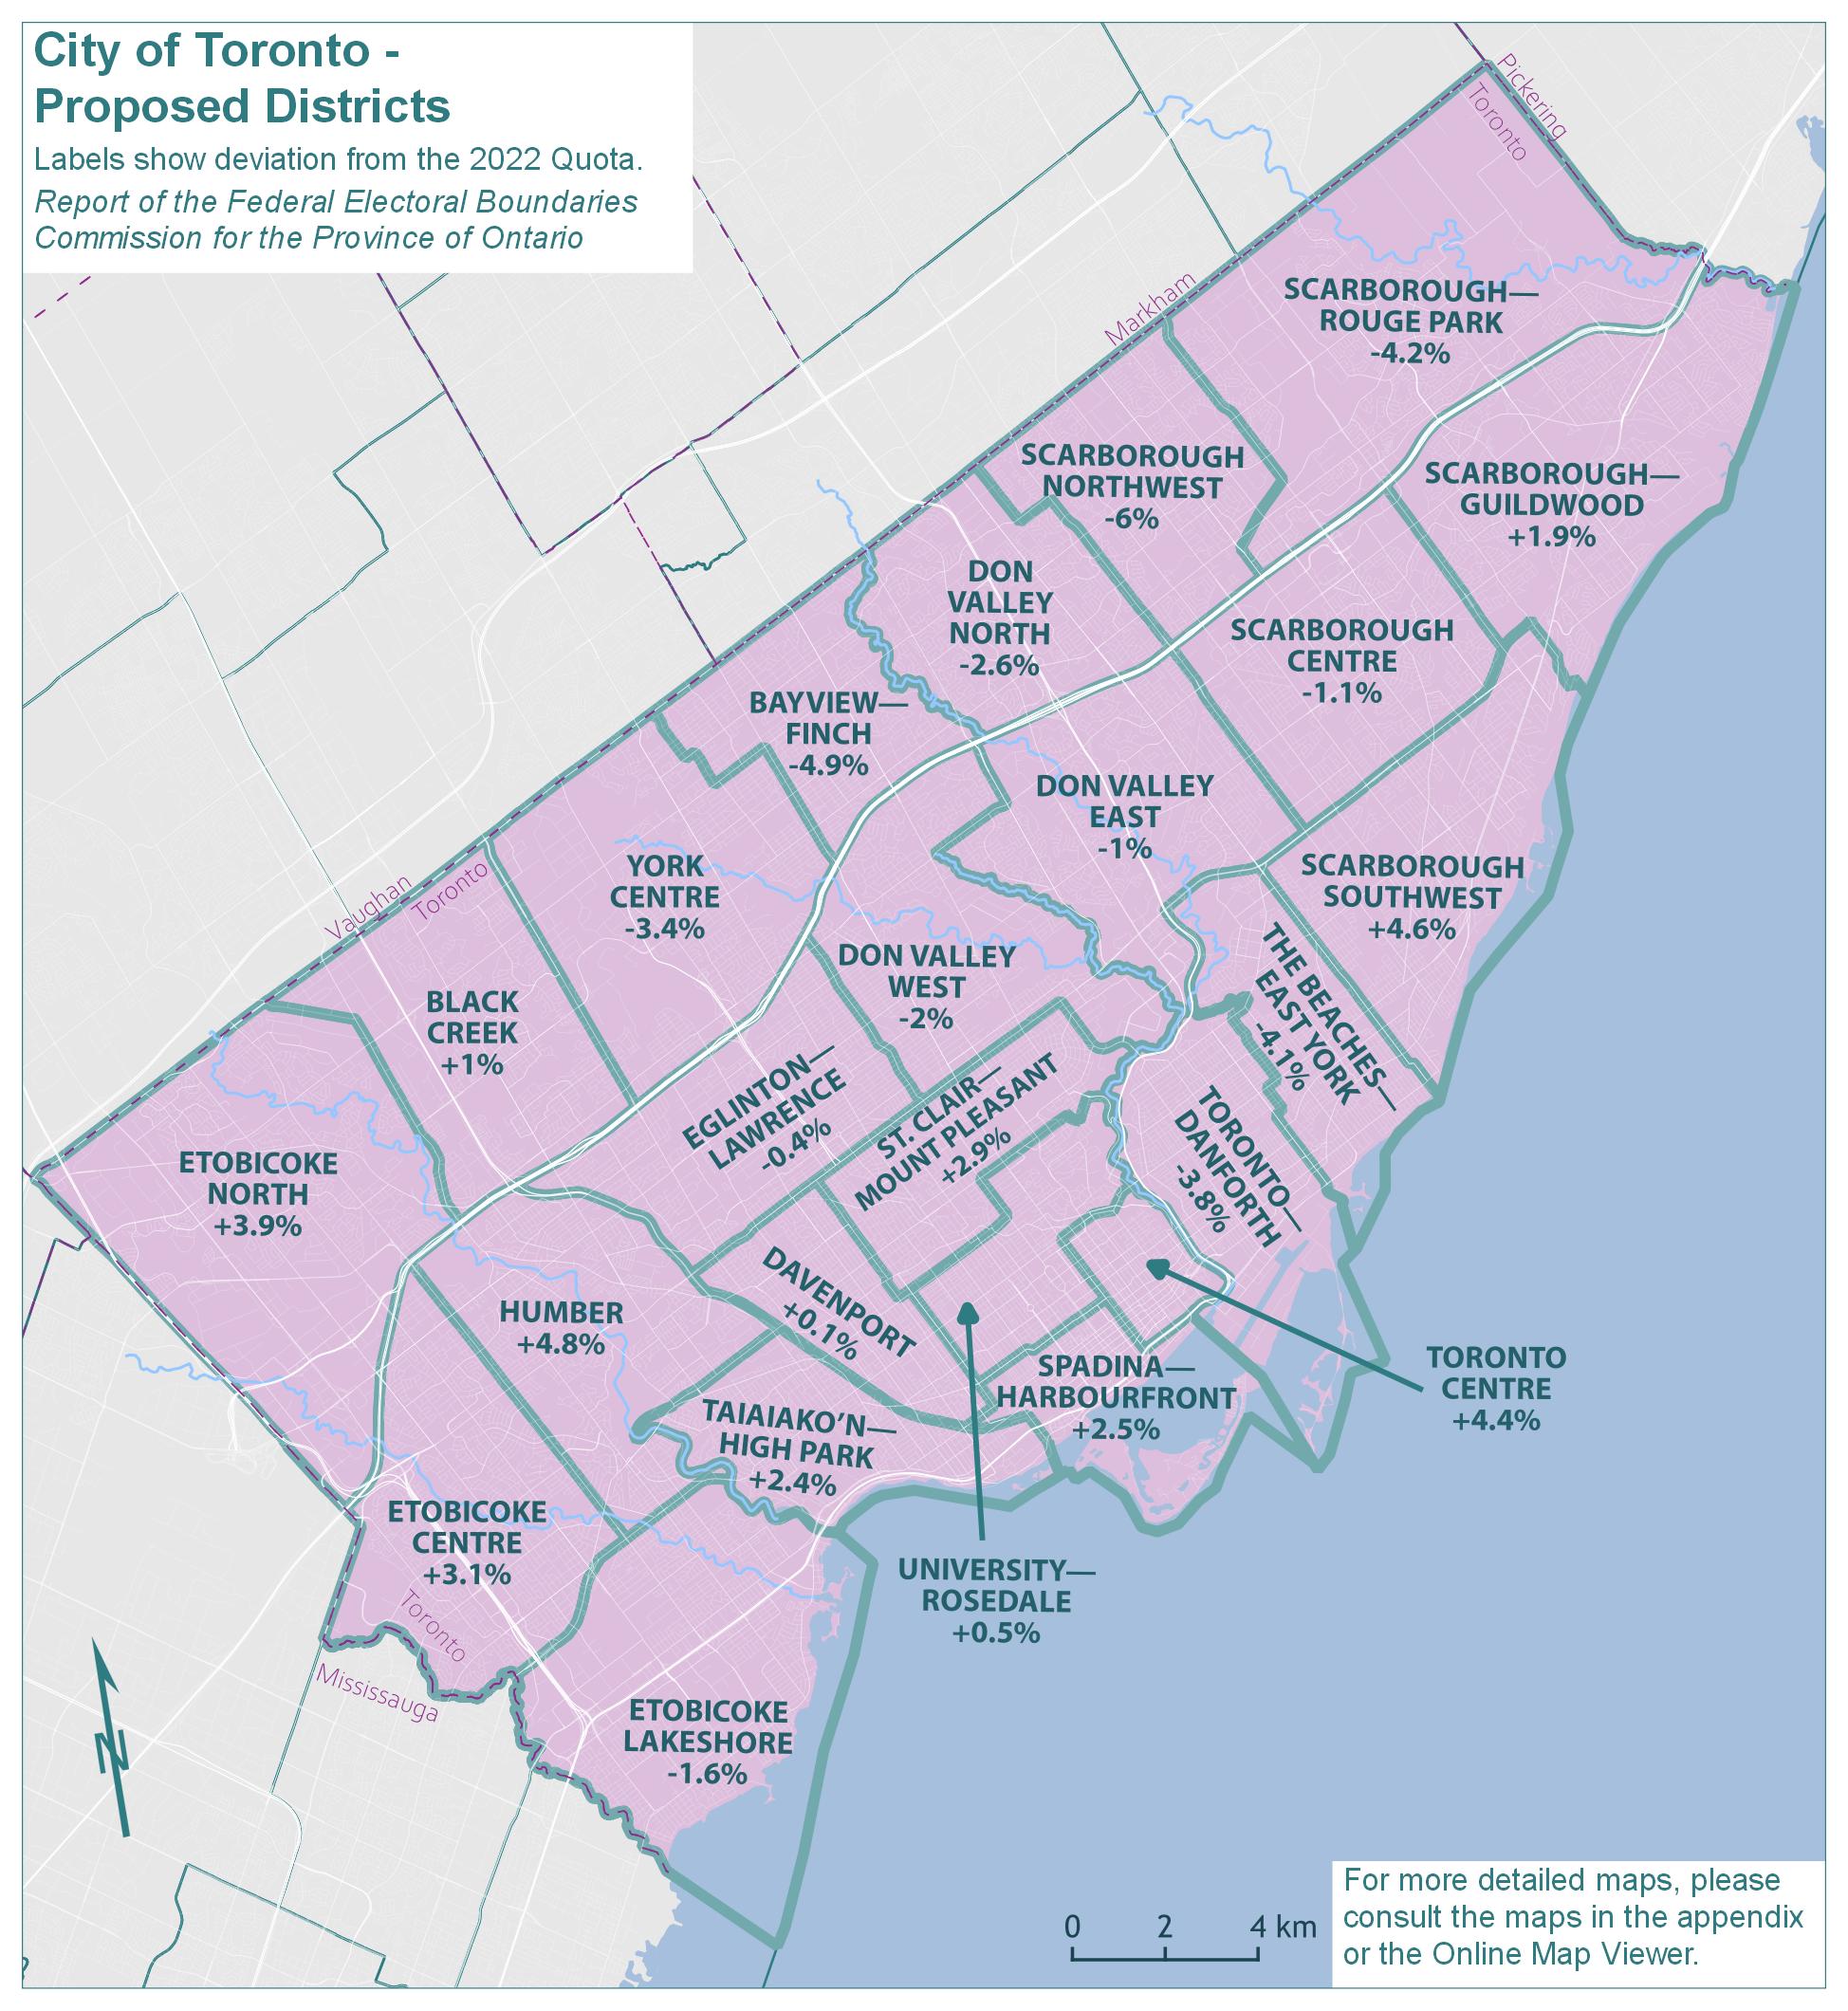 City of Toronto - Proposed Districts